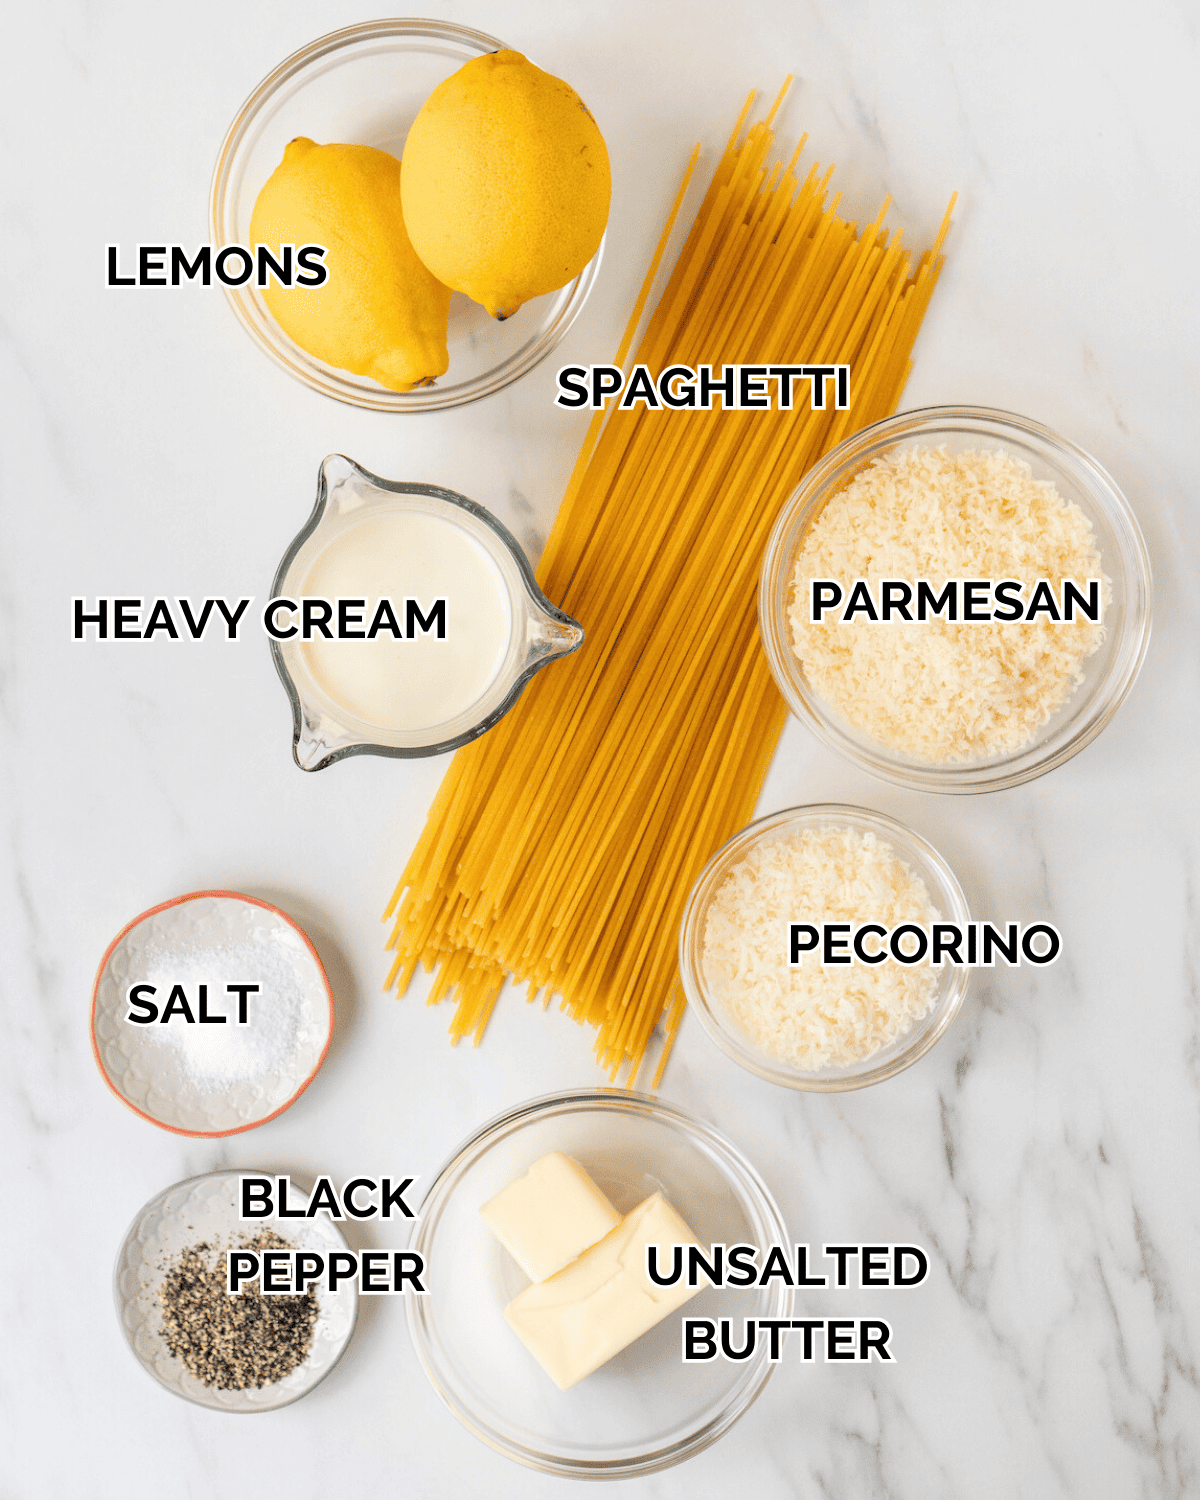 An overhead shot of all the ingredients in individual bowls.  Ingredients consist of 2 lemons, heavy cream, spaghetti, parmesan, salt, pecorino, black pepper, and unsalted butter.  